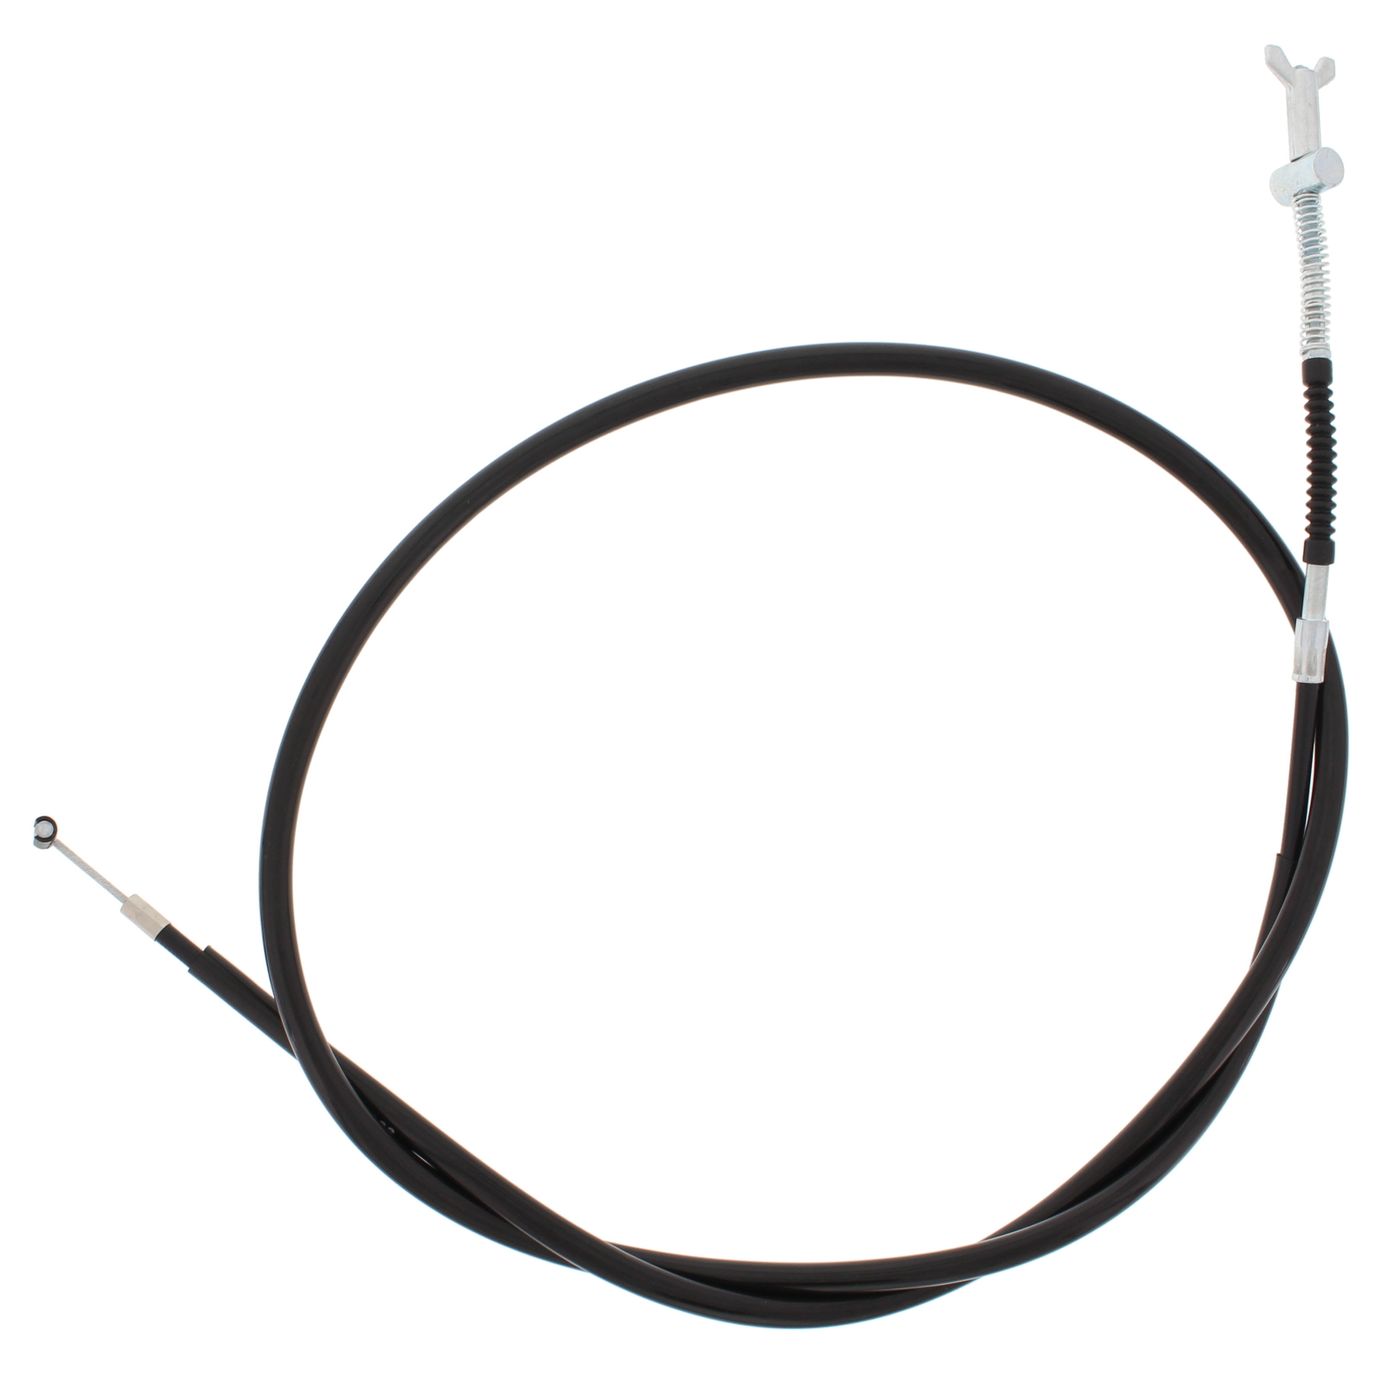 Wrp Brake Cables - WRP454072 image